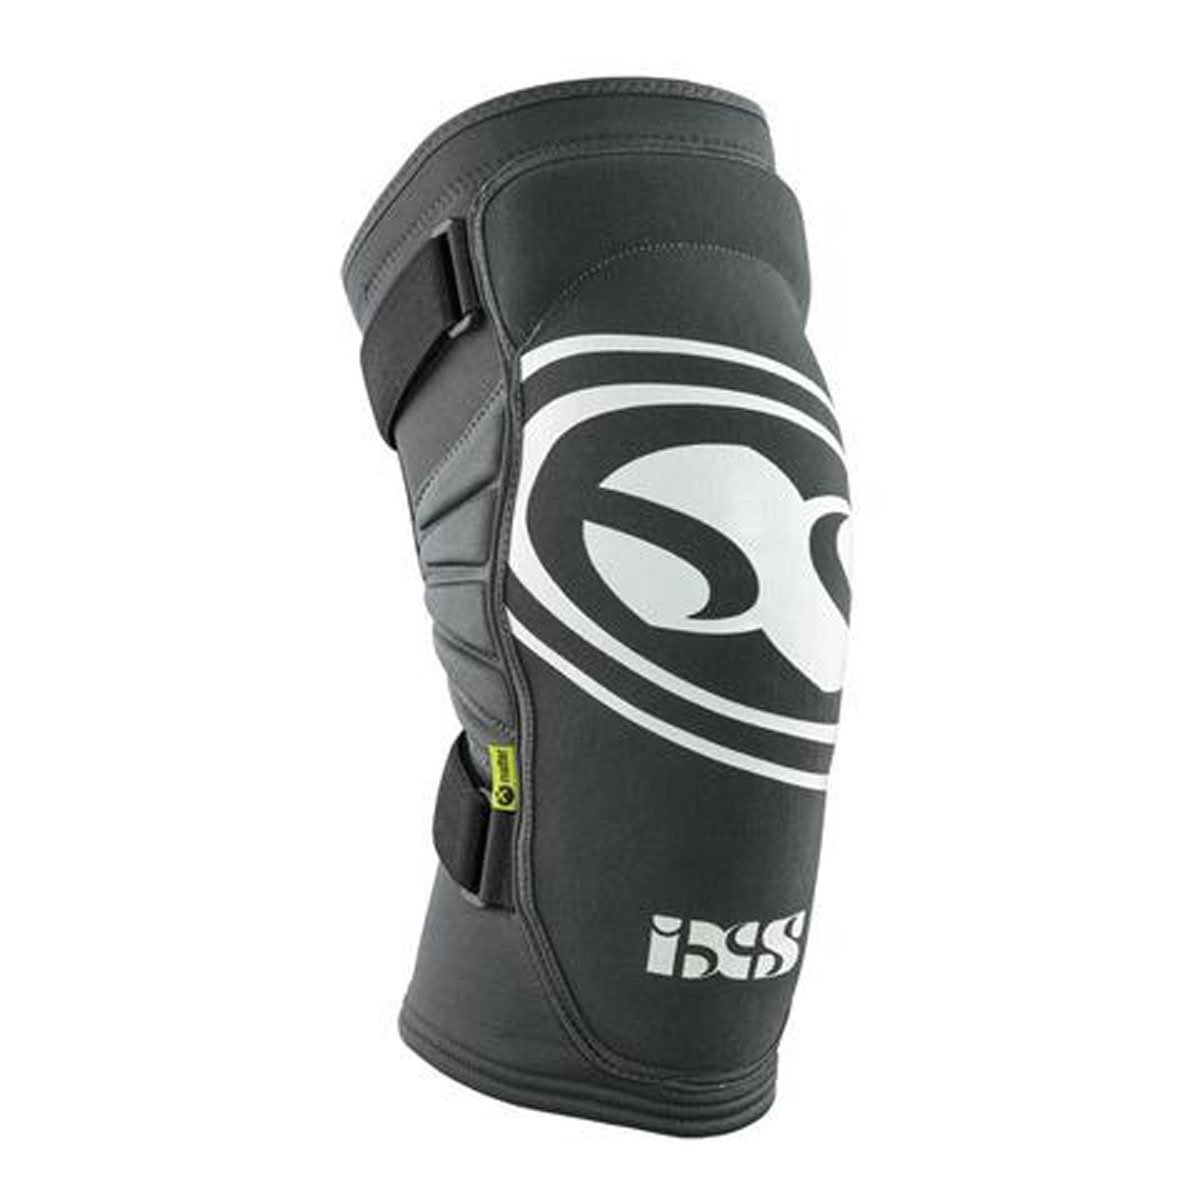 youth mtb elbow pads